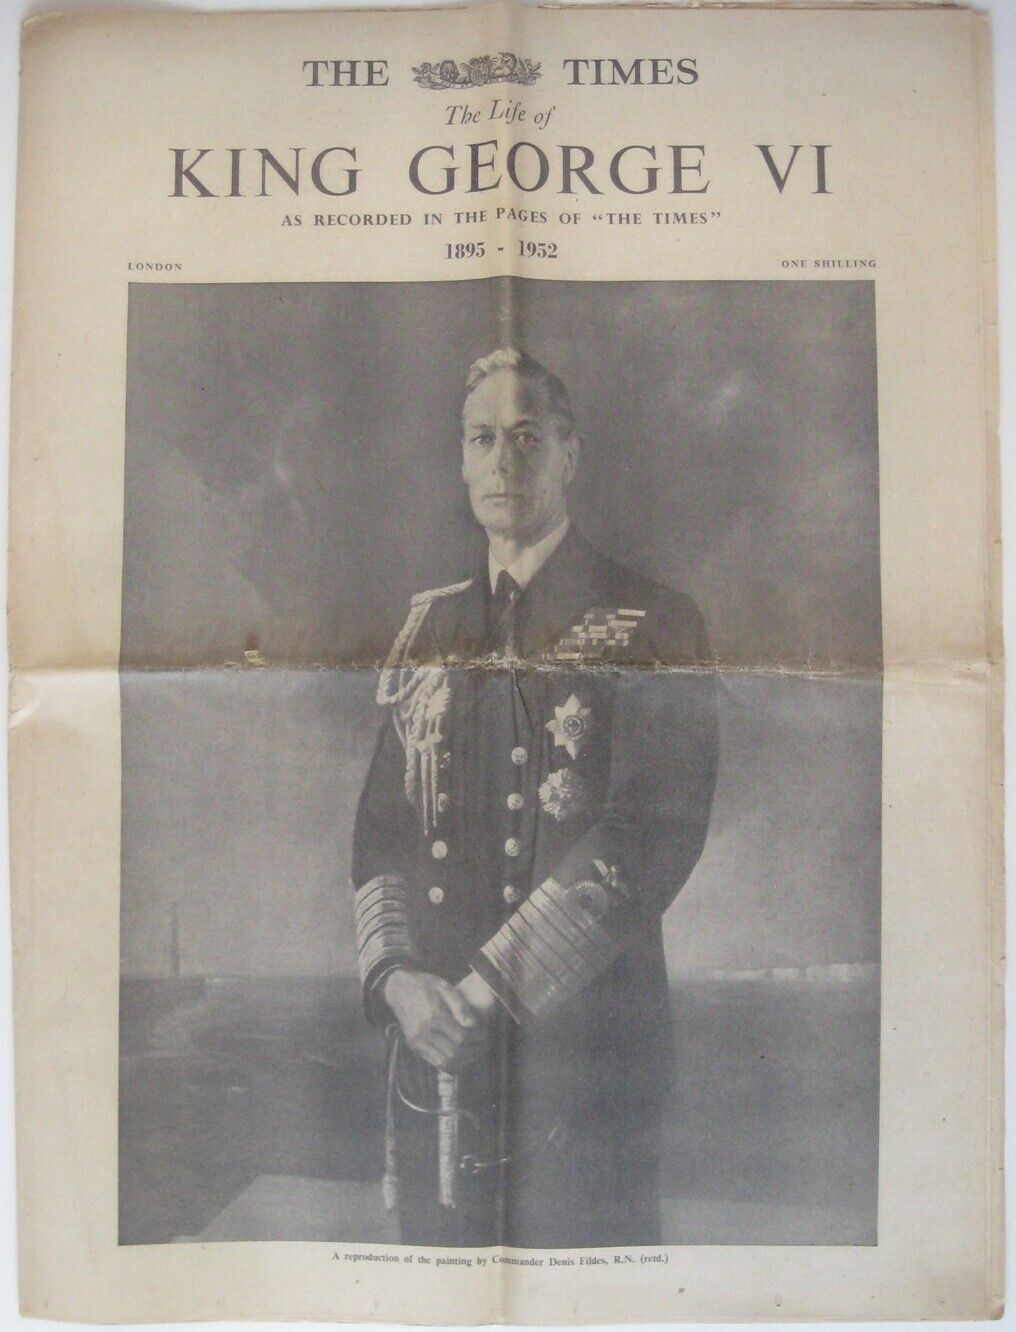 1952 London Times THE LIFE OF KING GEORGE VI Photographs Coronation Funeral 16pp